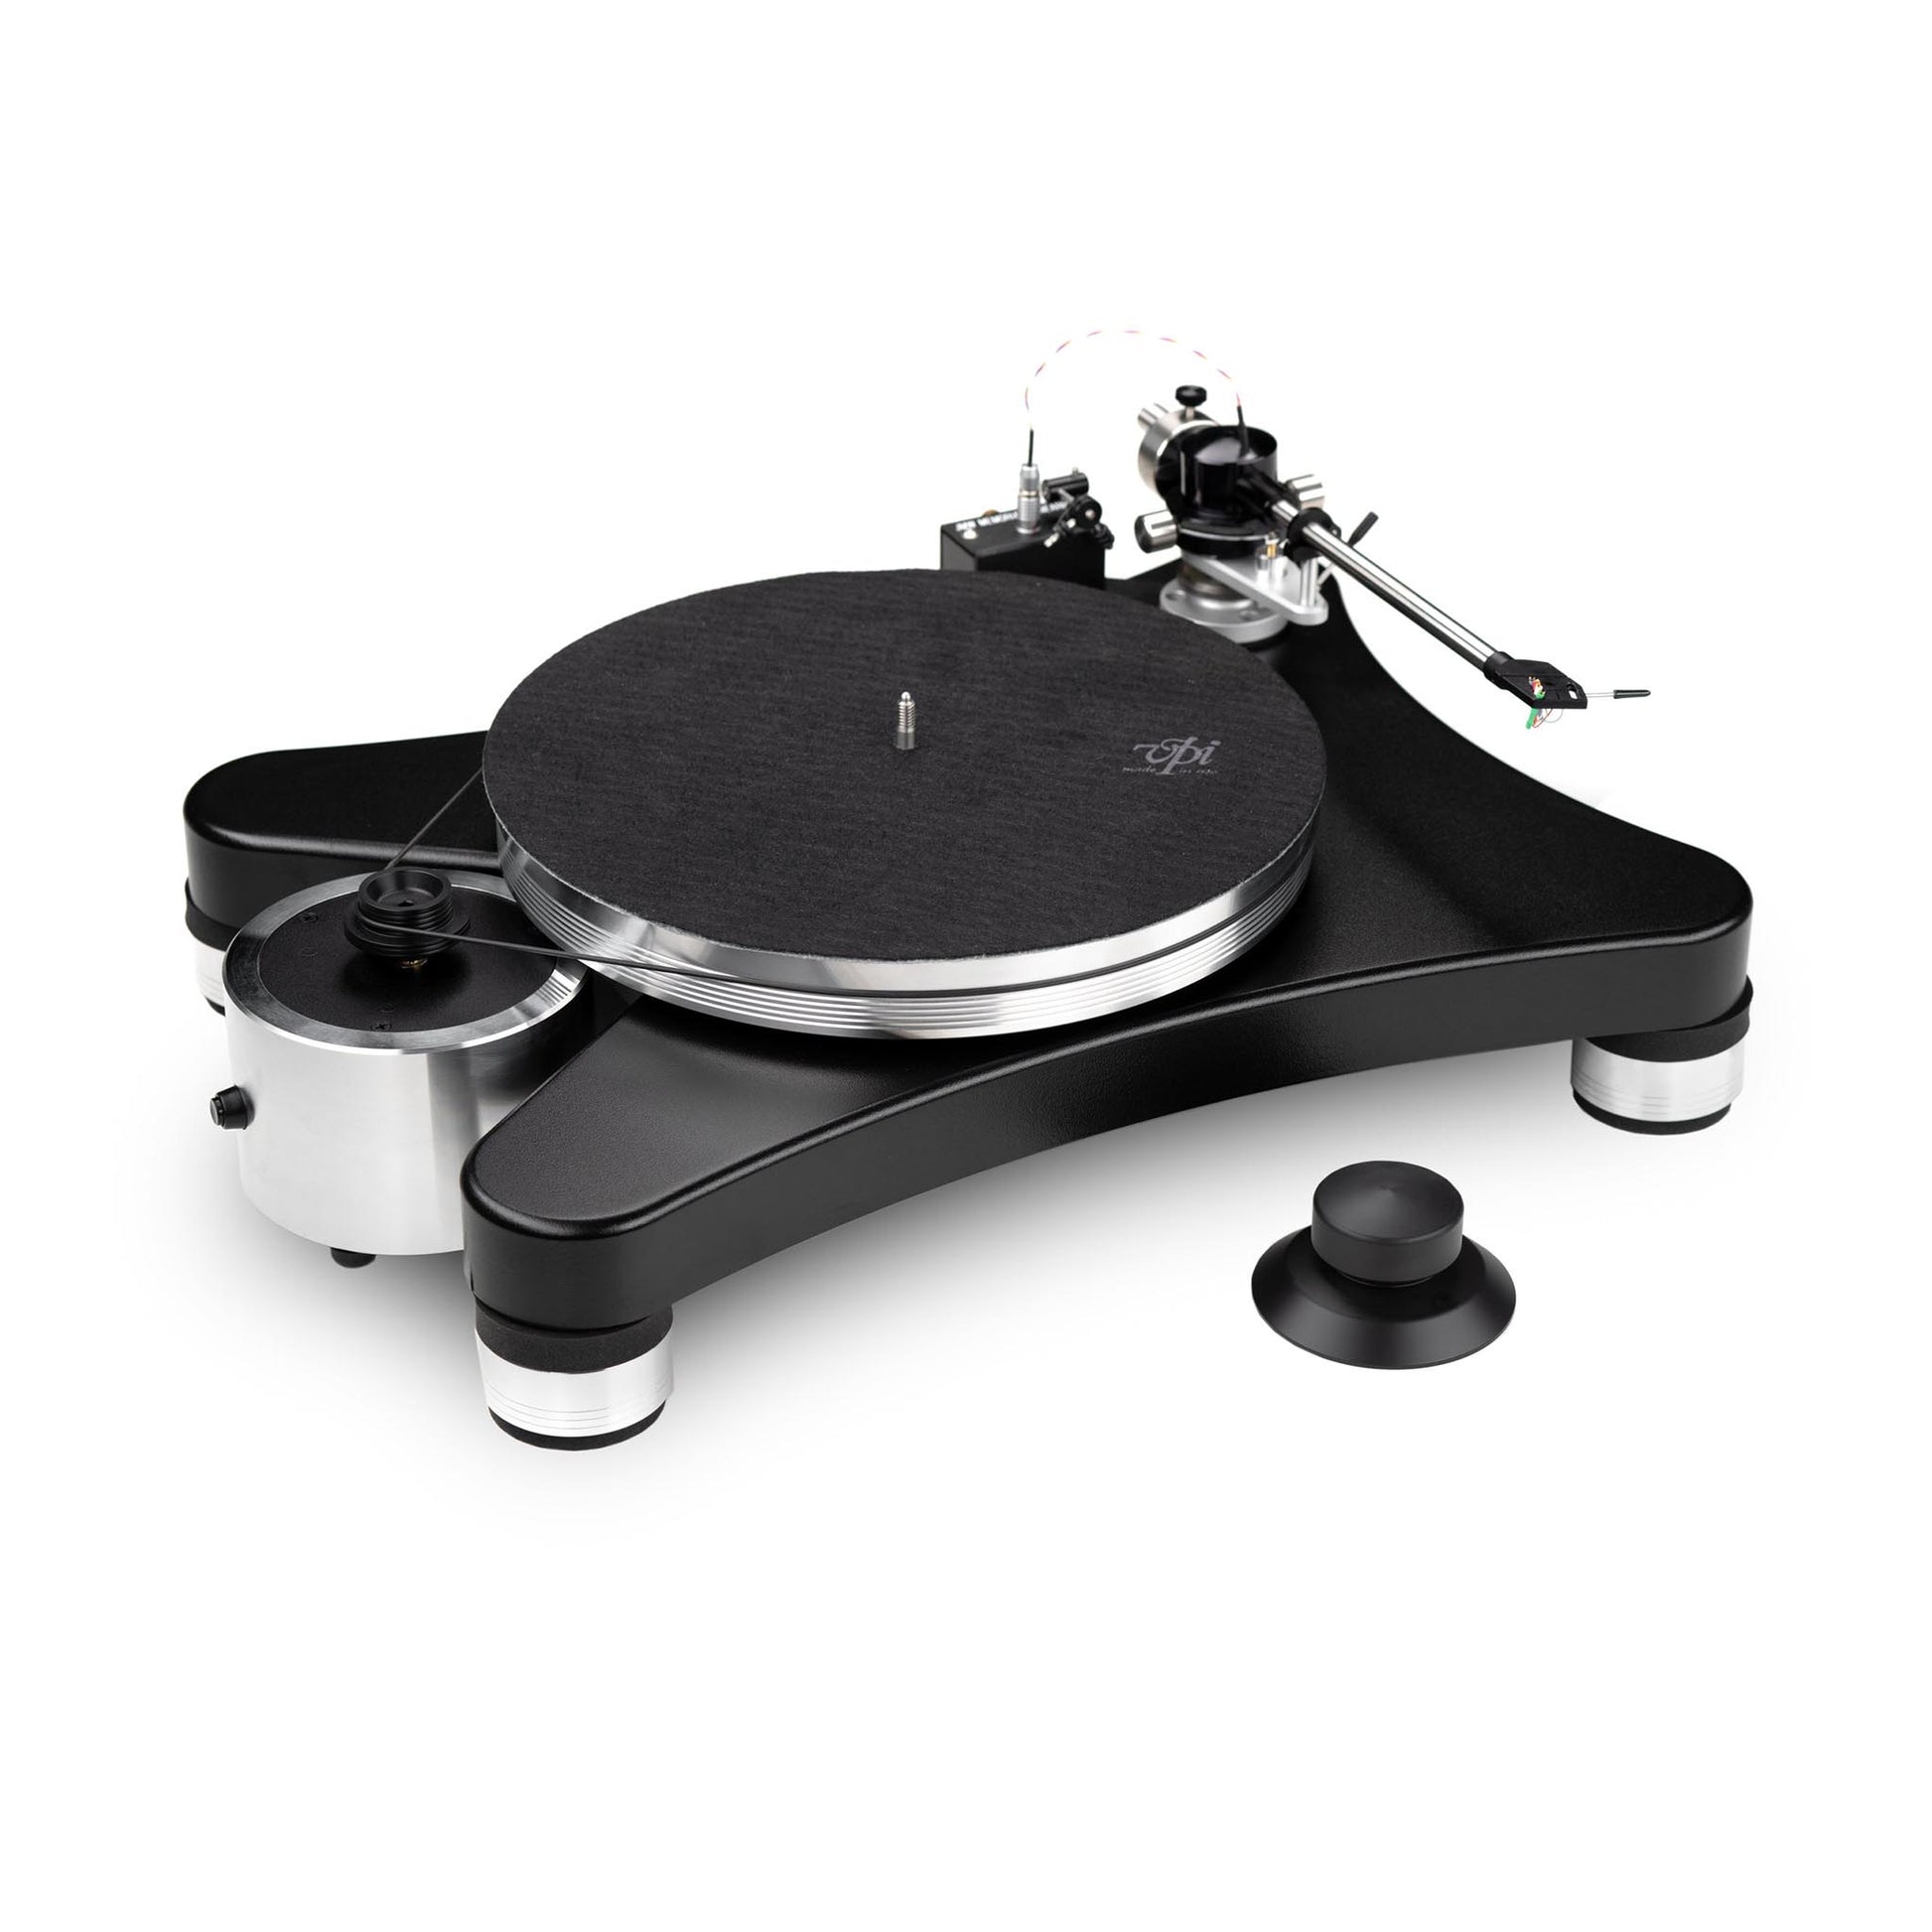 VPI Scout 21 Turntable - top